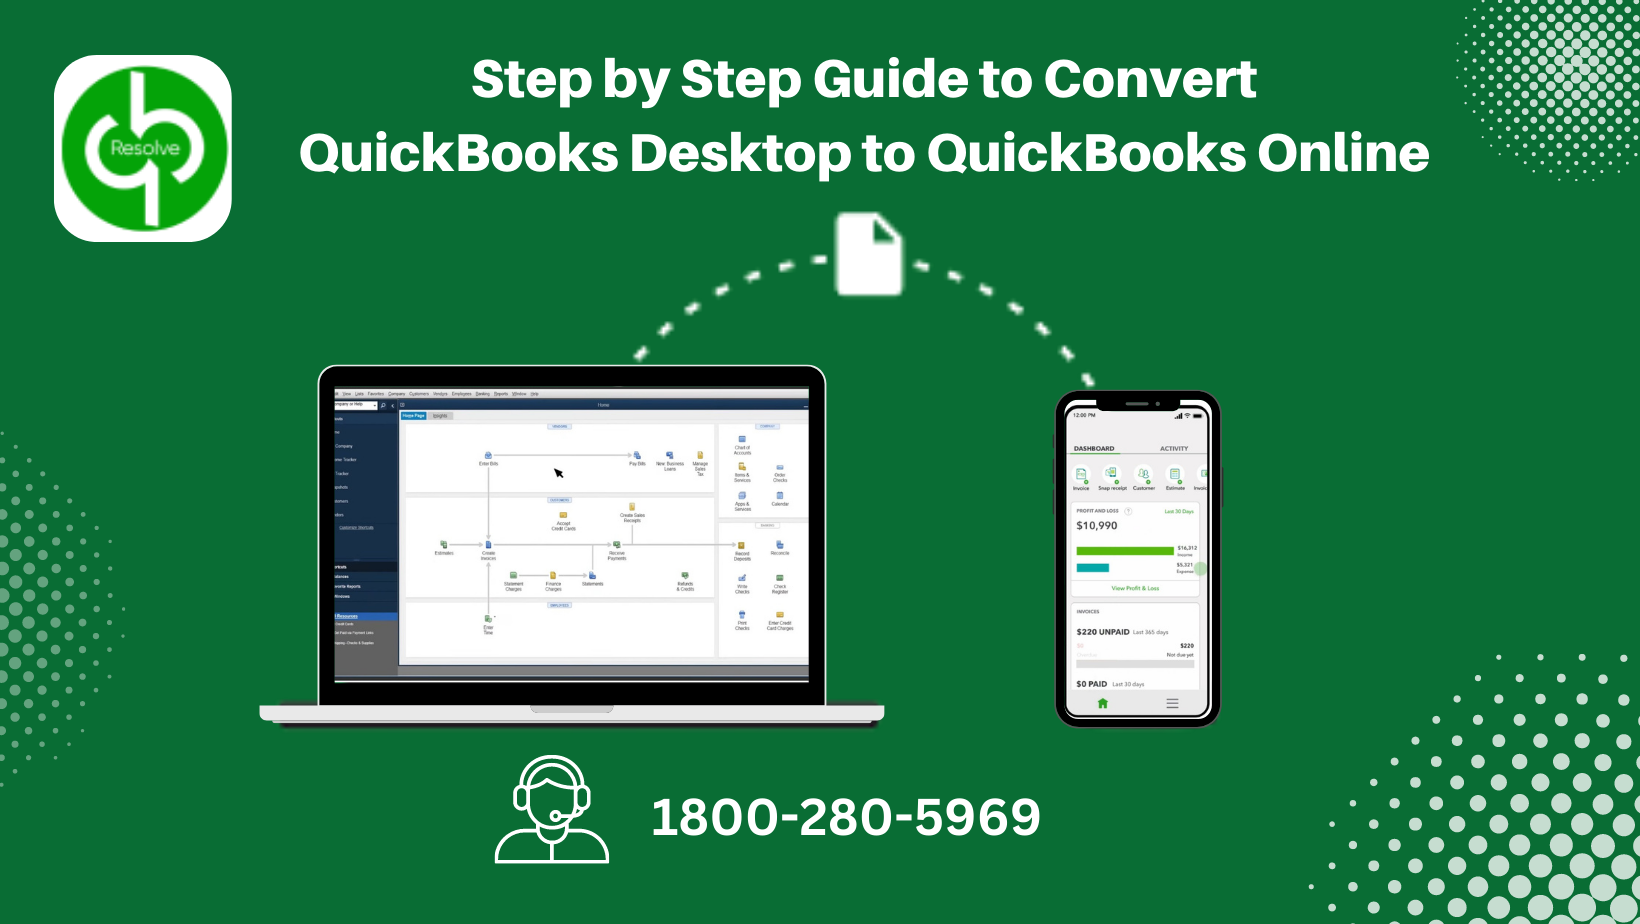 Step by step guide to convert QuickBooks Desktop to QuickBooks Online